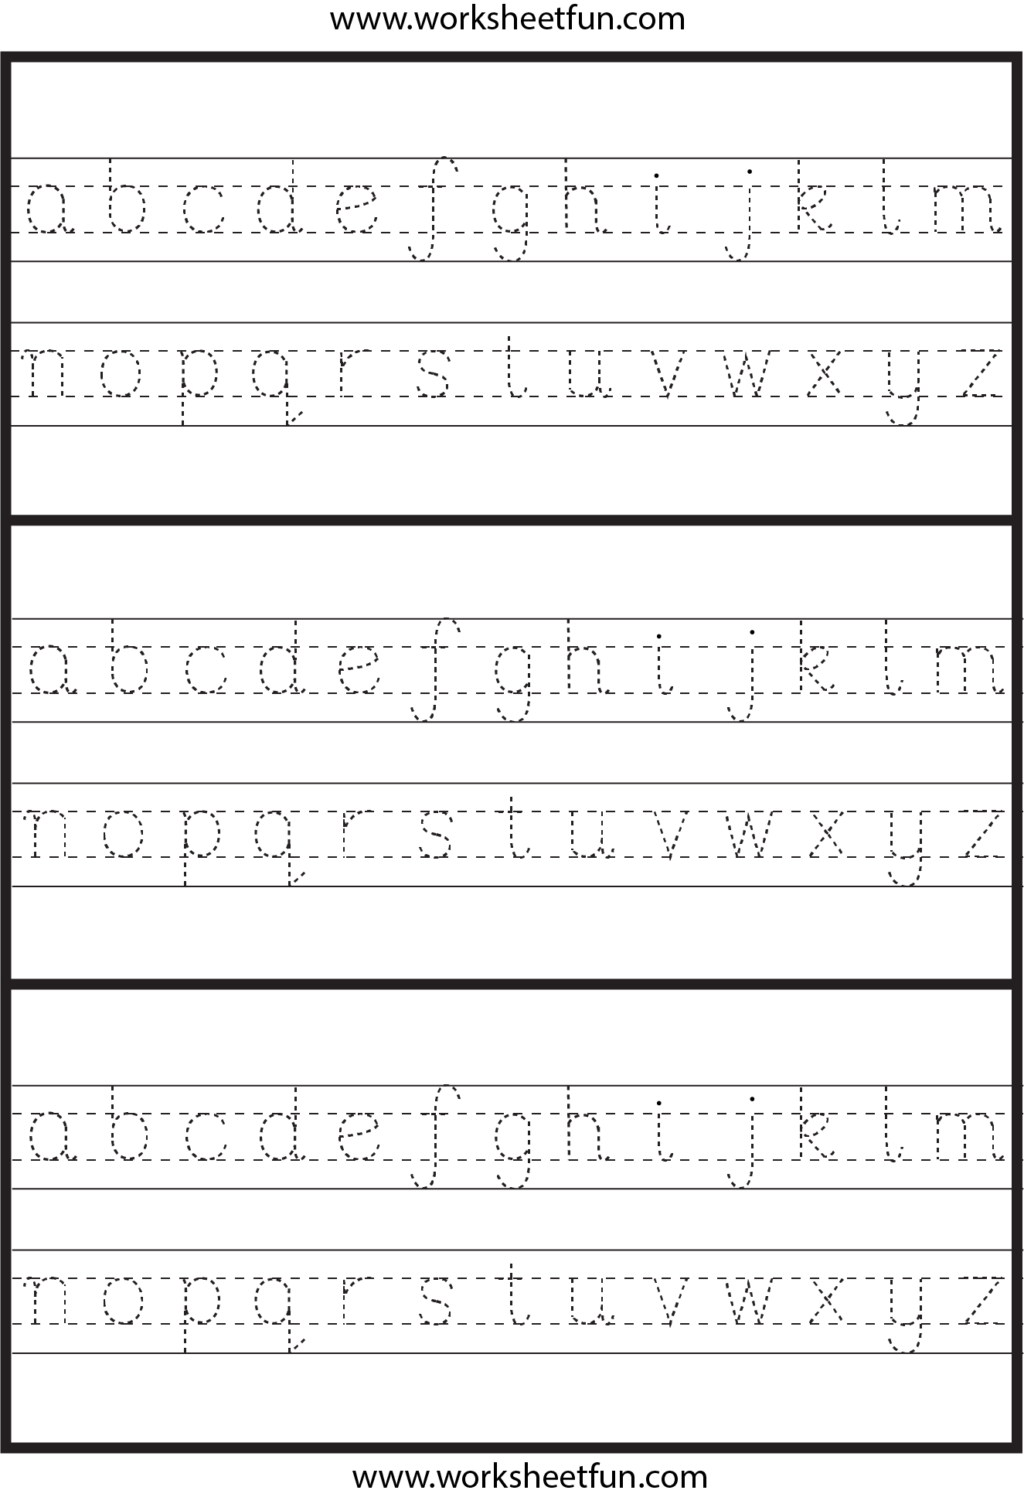 Worksheet ~ Small Letters Tracing Learning Worksheets with Letter Tracing Online Games